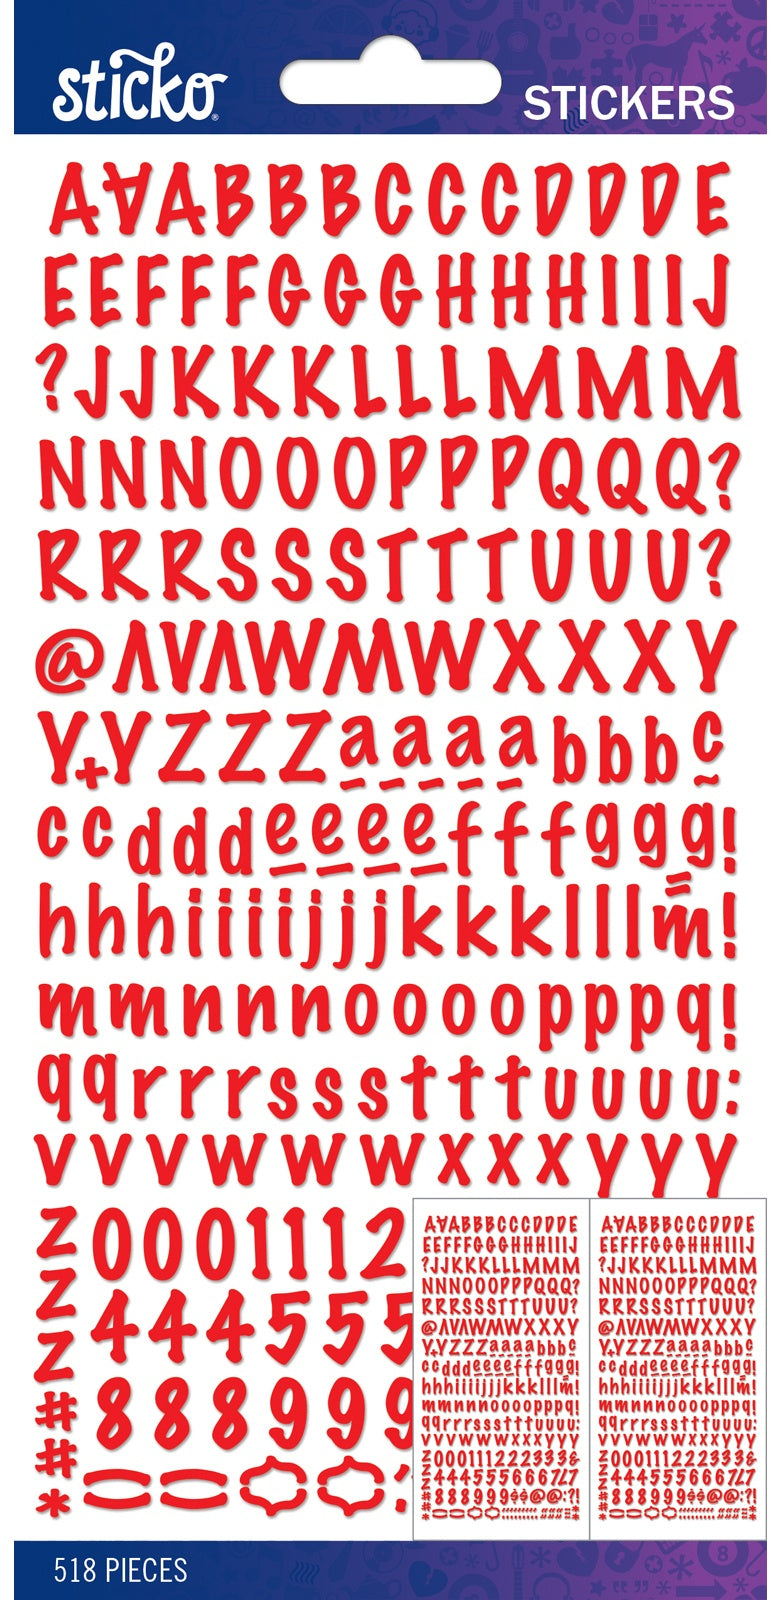 Sticko Alphabet Stickers-Red Marker Small